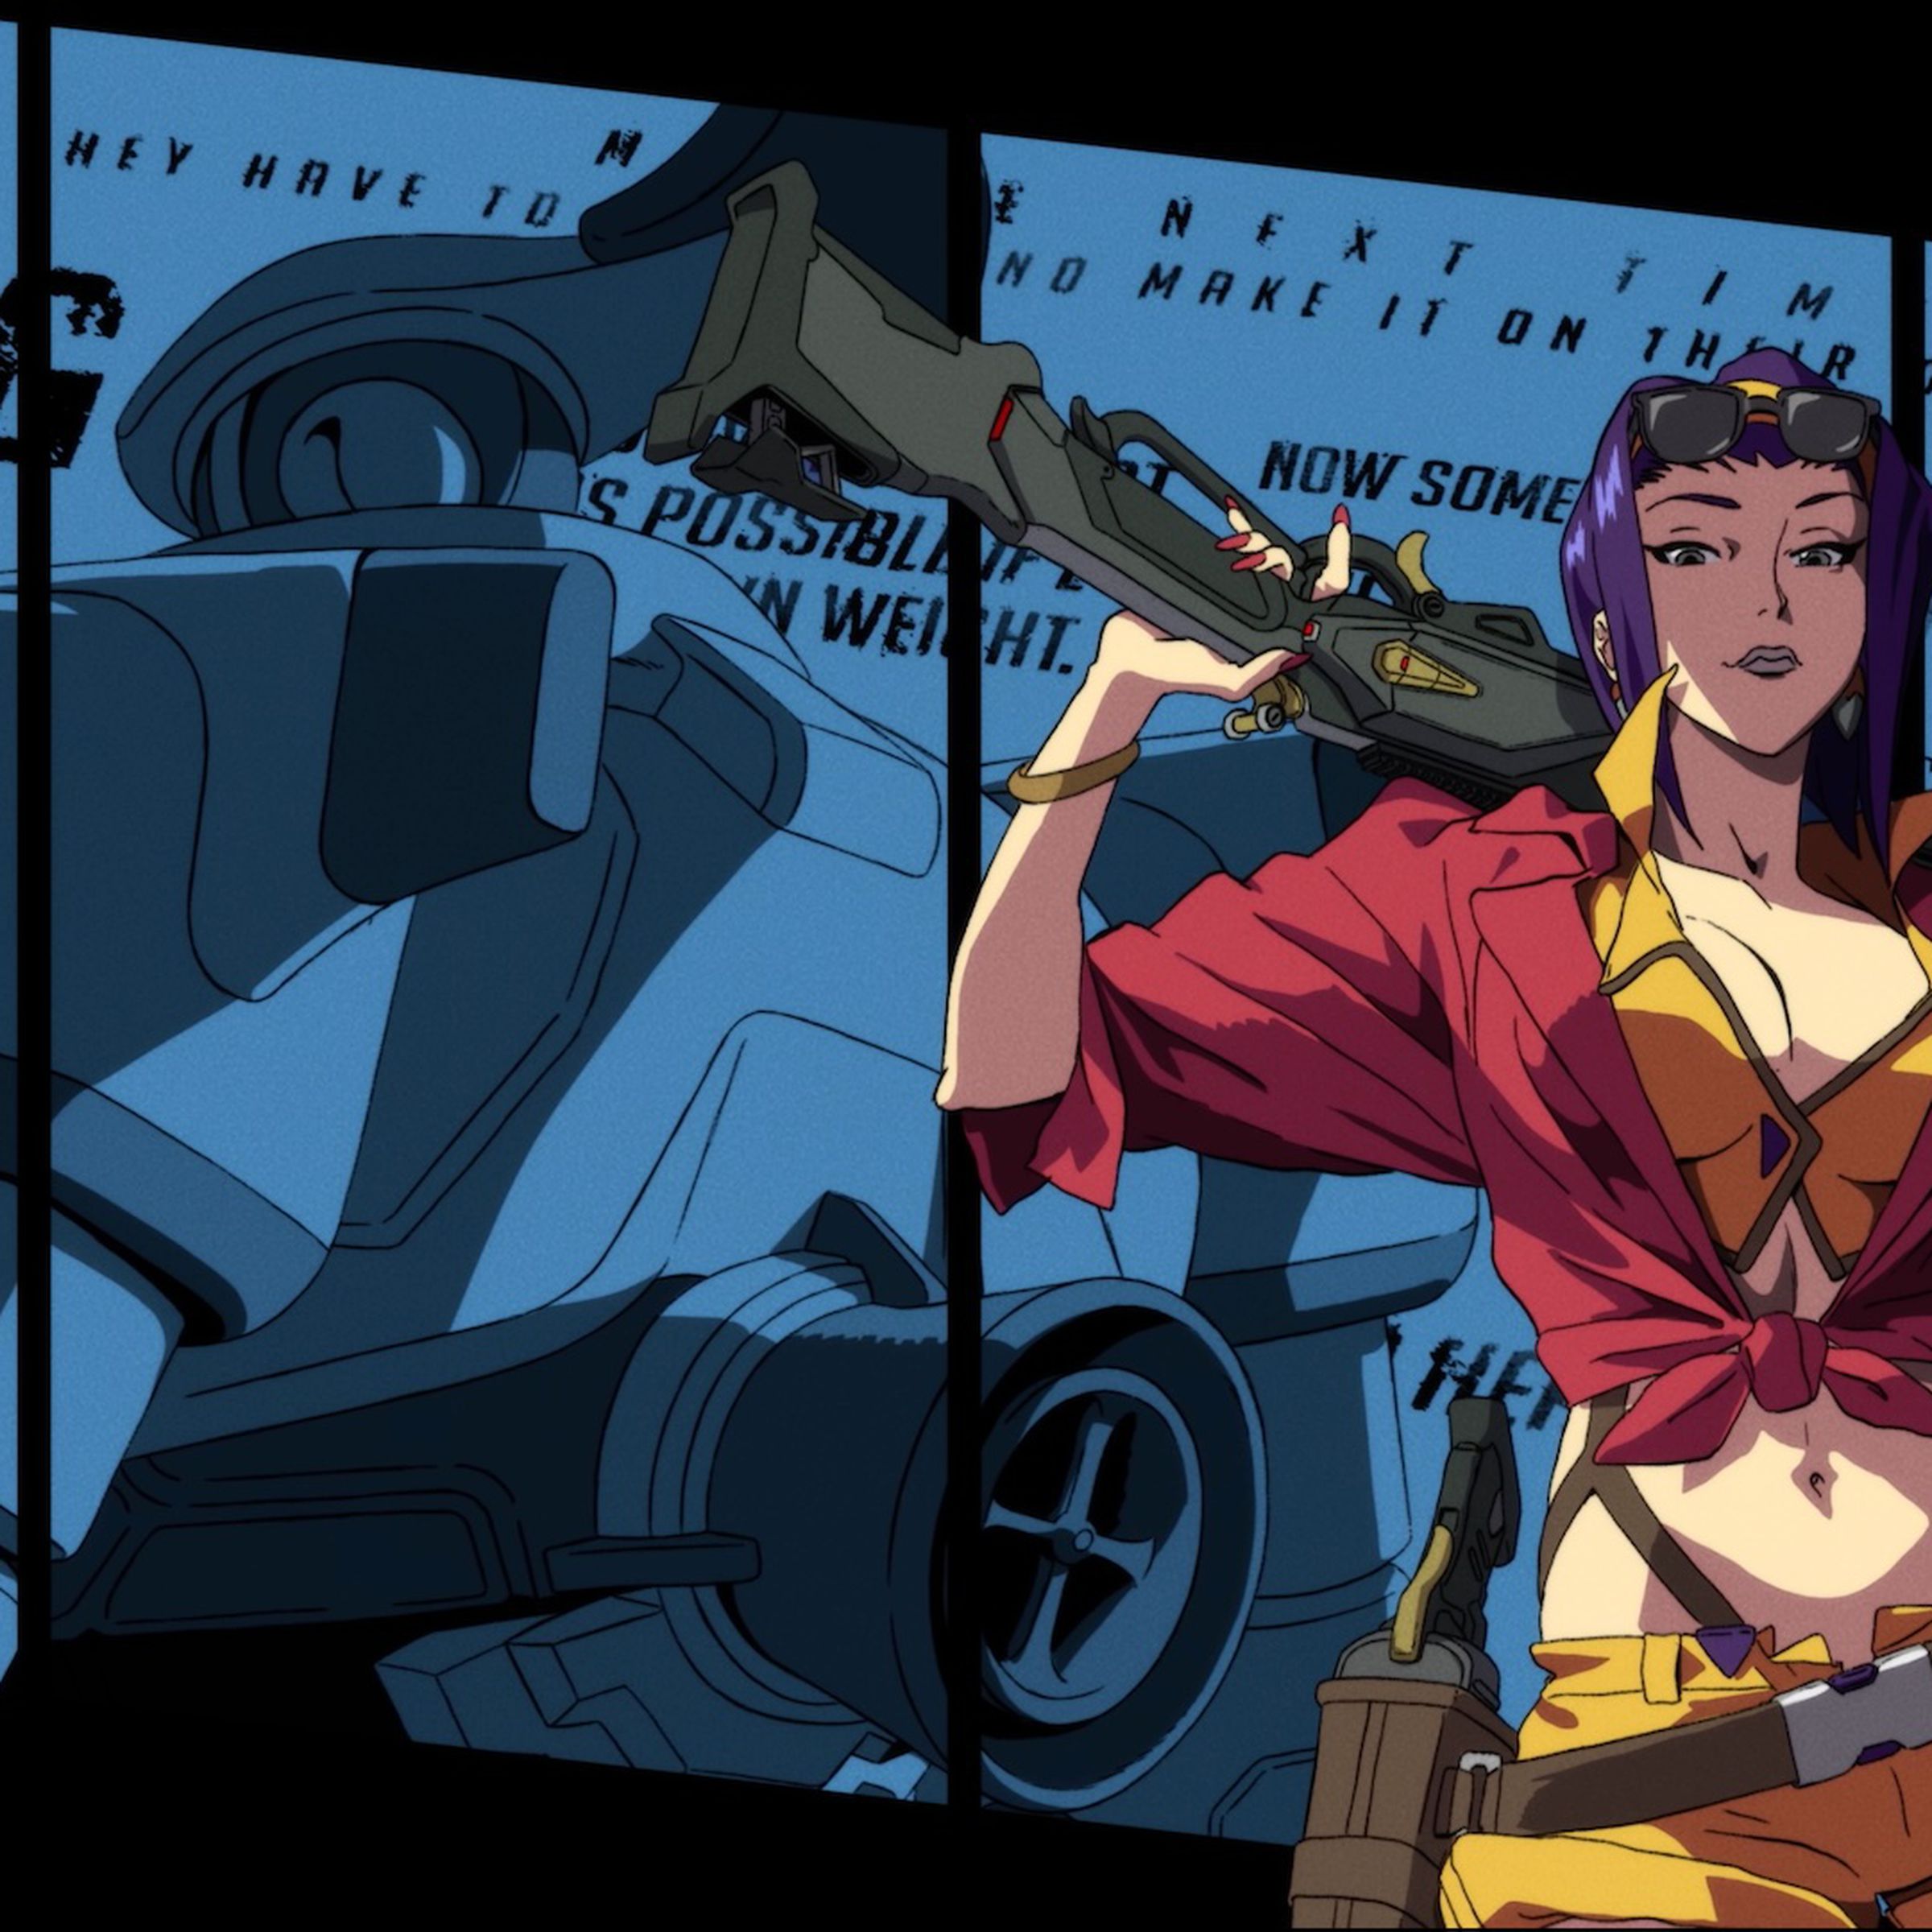 Image from the Cowboy Bebop x Overwatch 2 collaboration featuring the hero Ashe dressed up as Faye Valentine